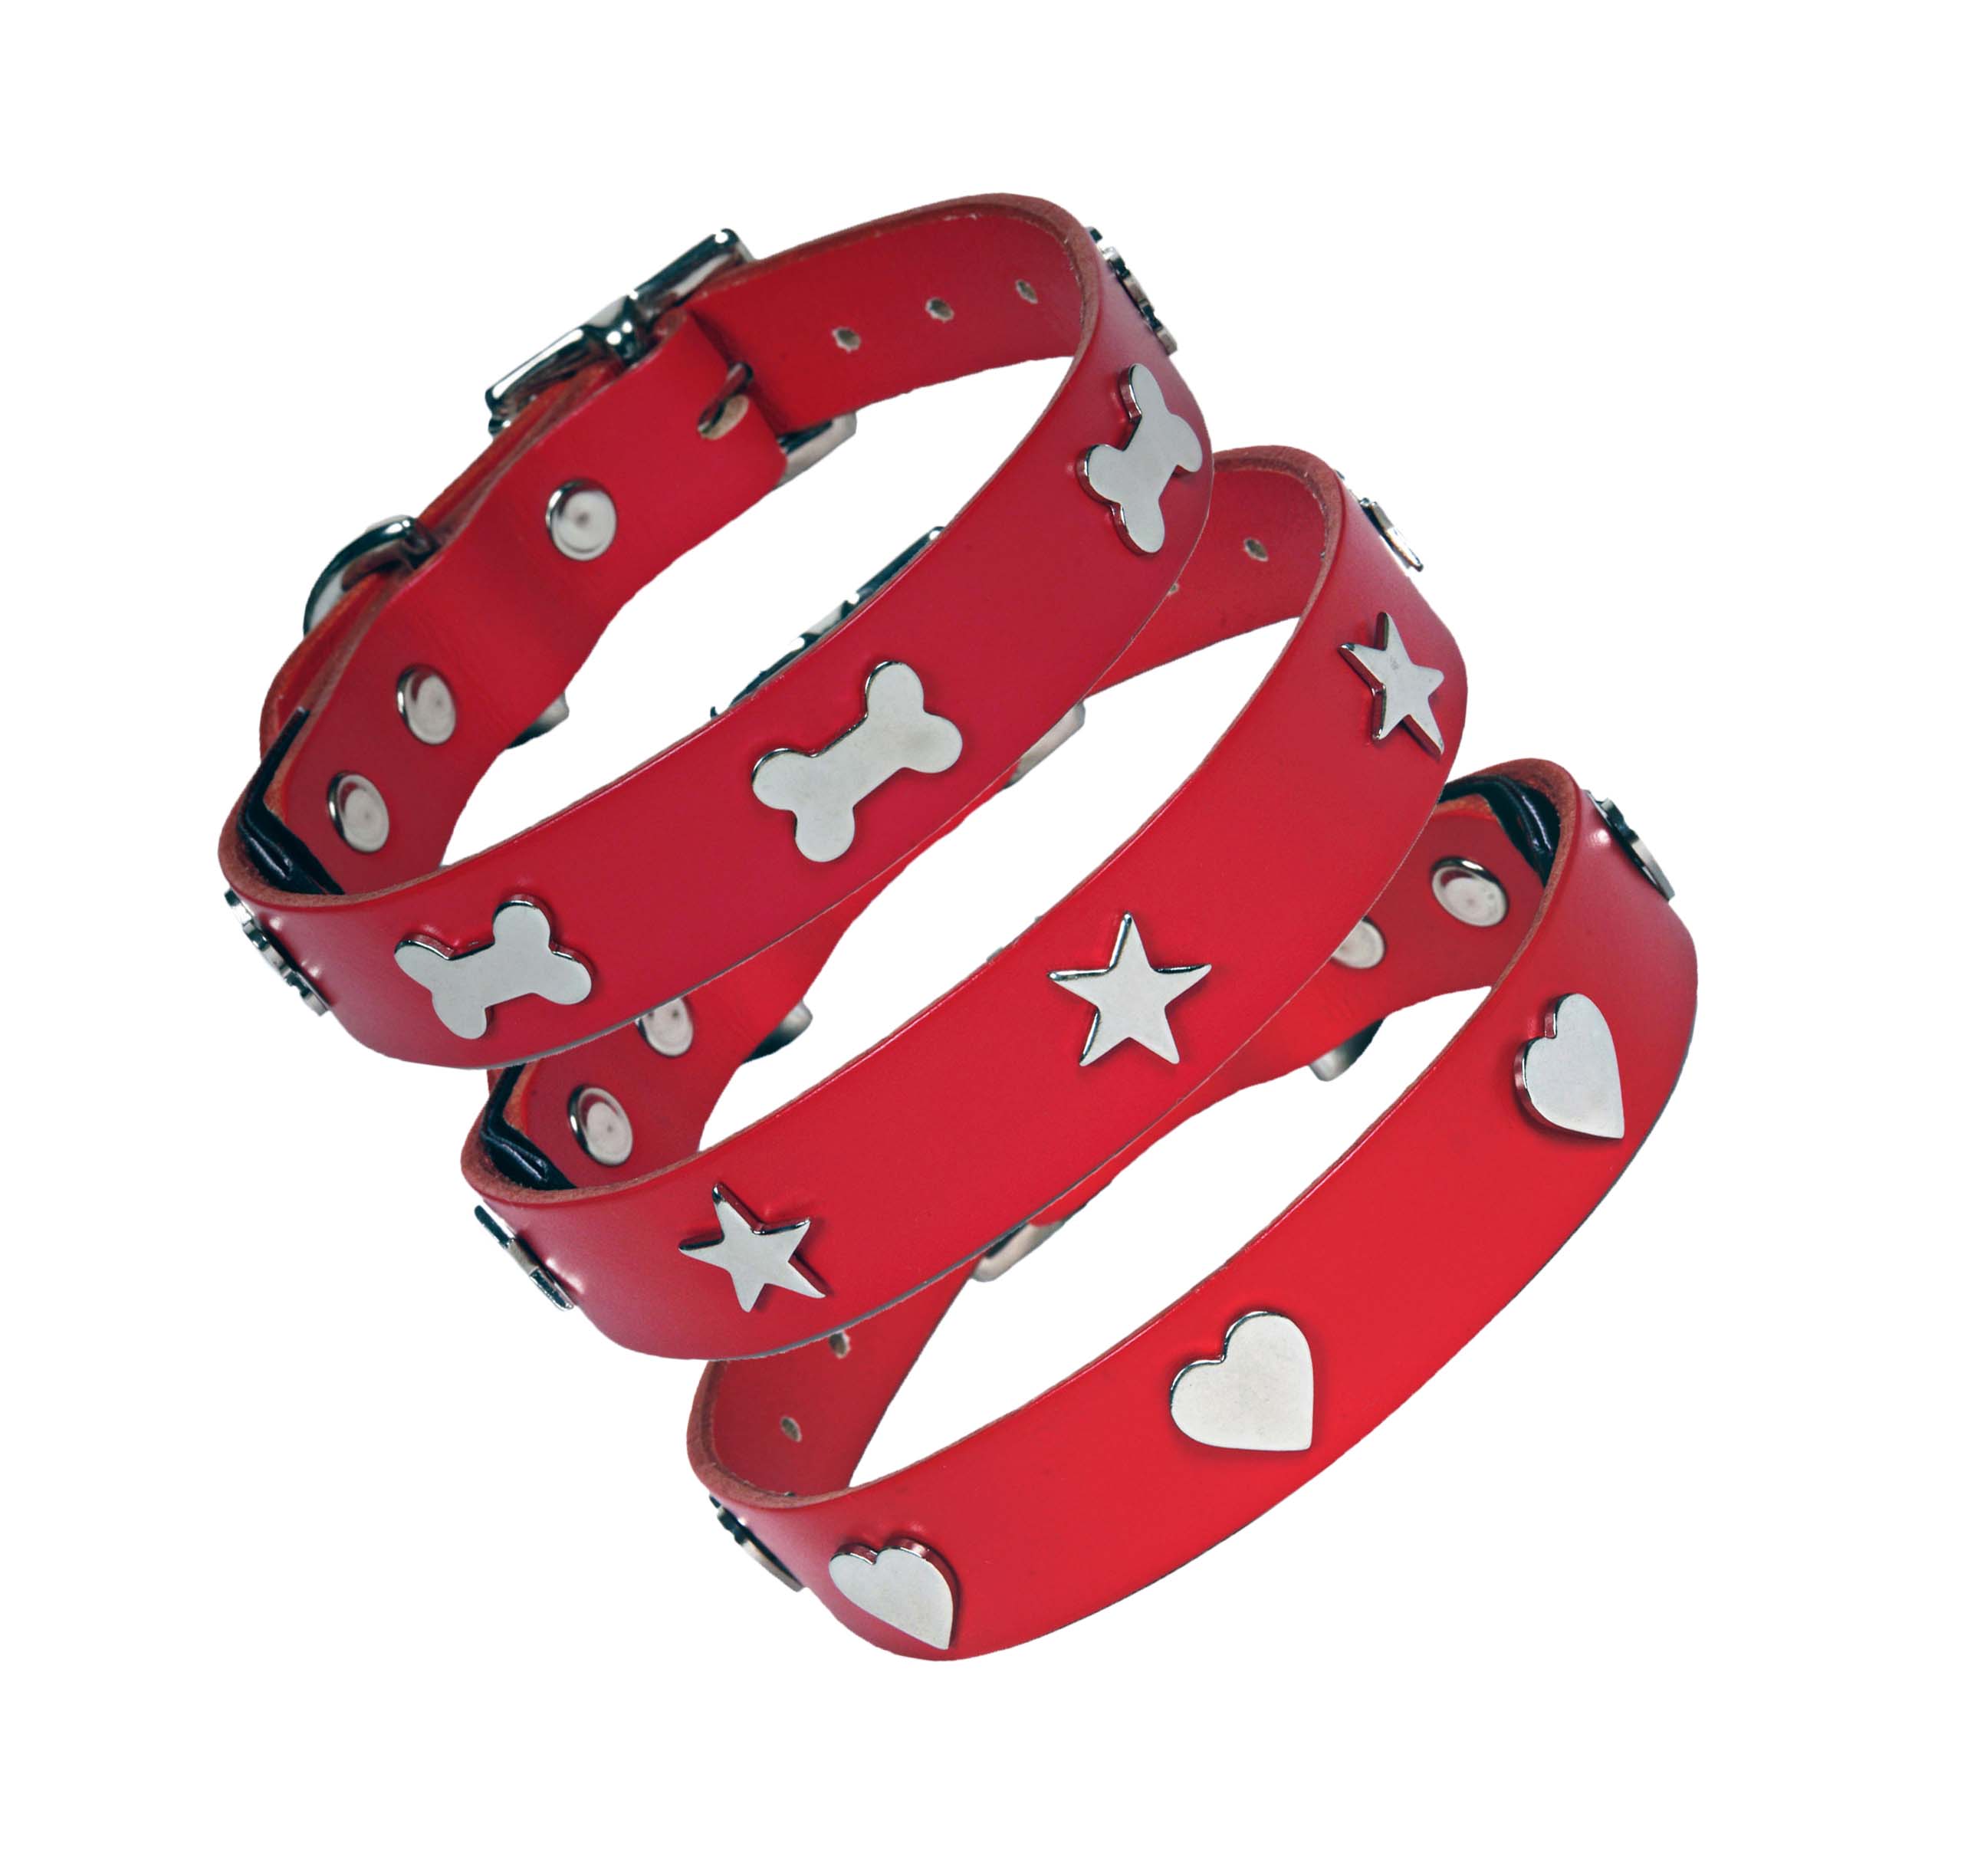 Creature Clothes Red Leather Dog Collar With Silver Studs